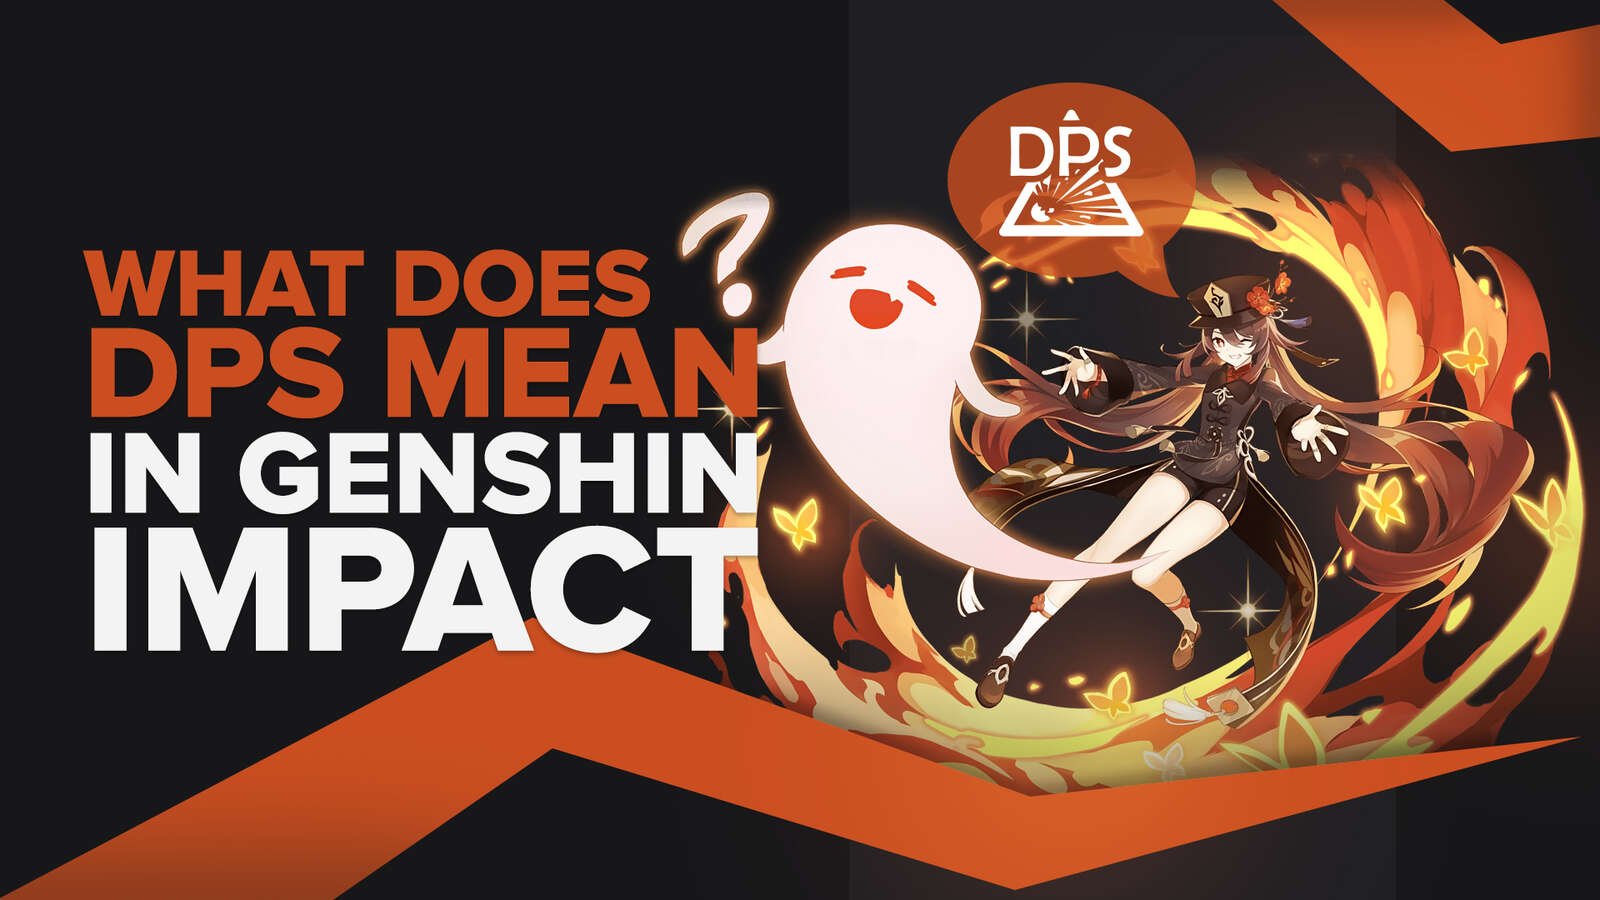 What does DPS mean in Genshin Impact?